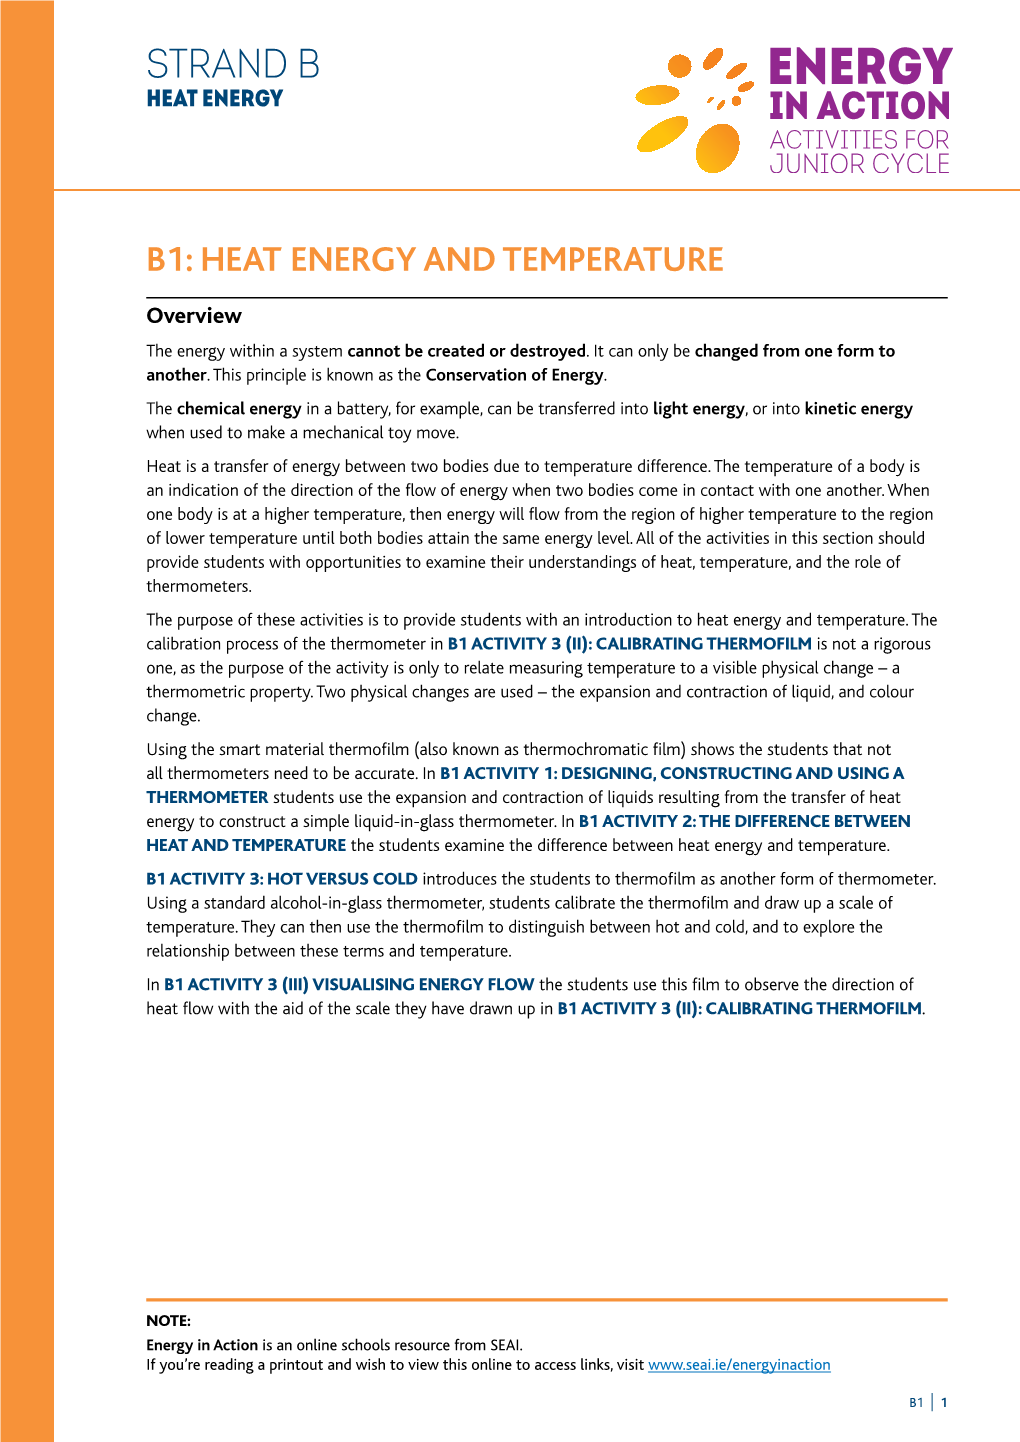 Heat Energy and Temperature